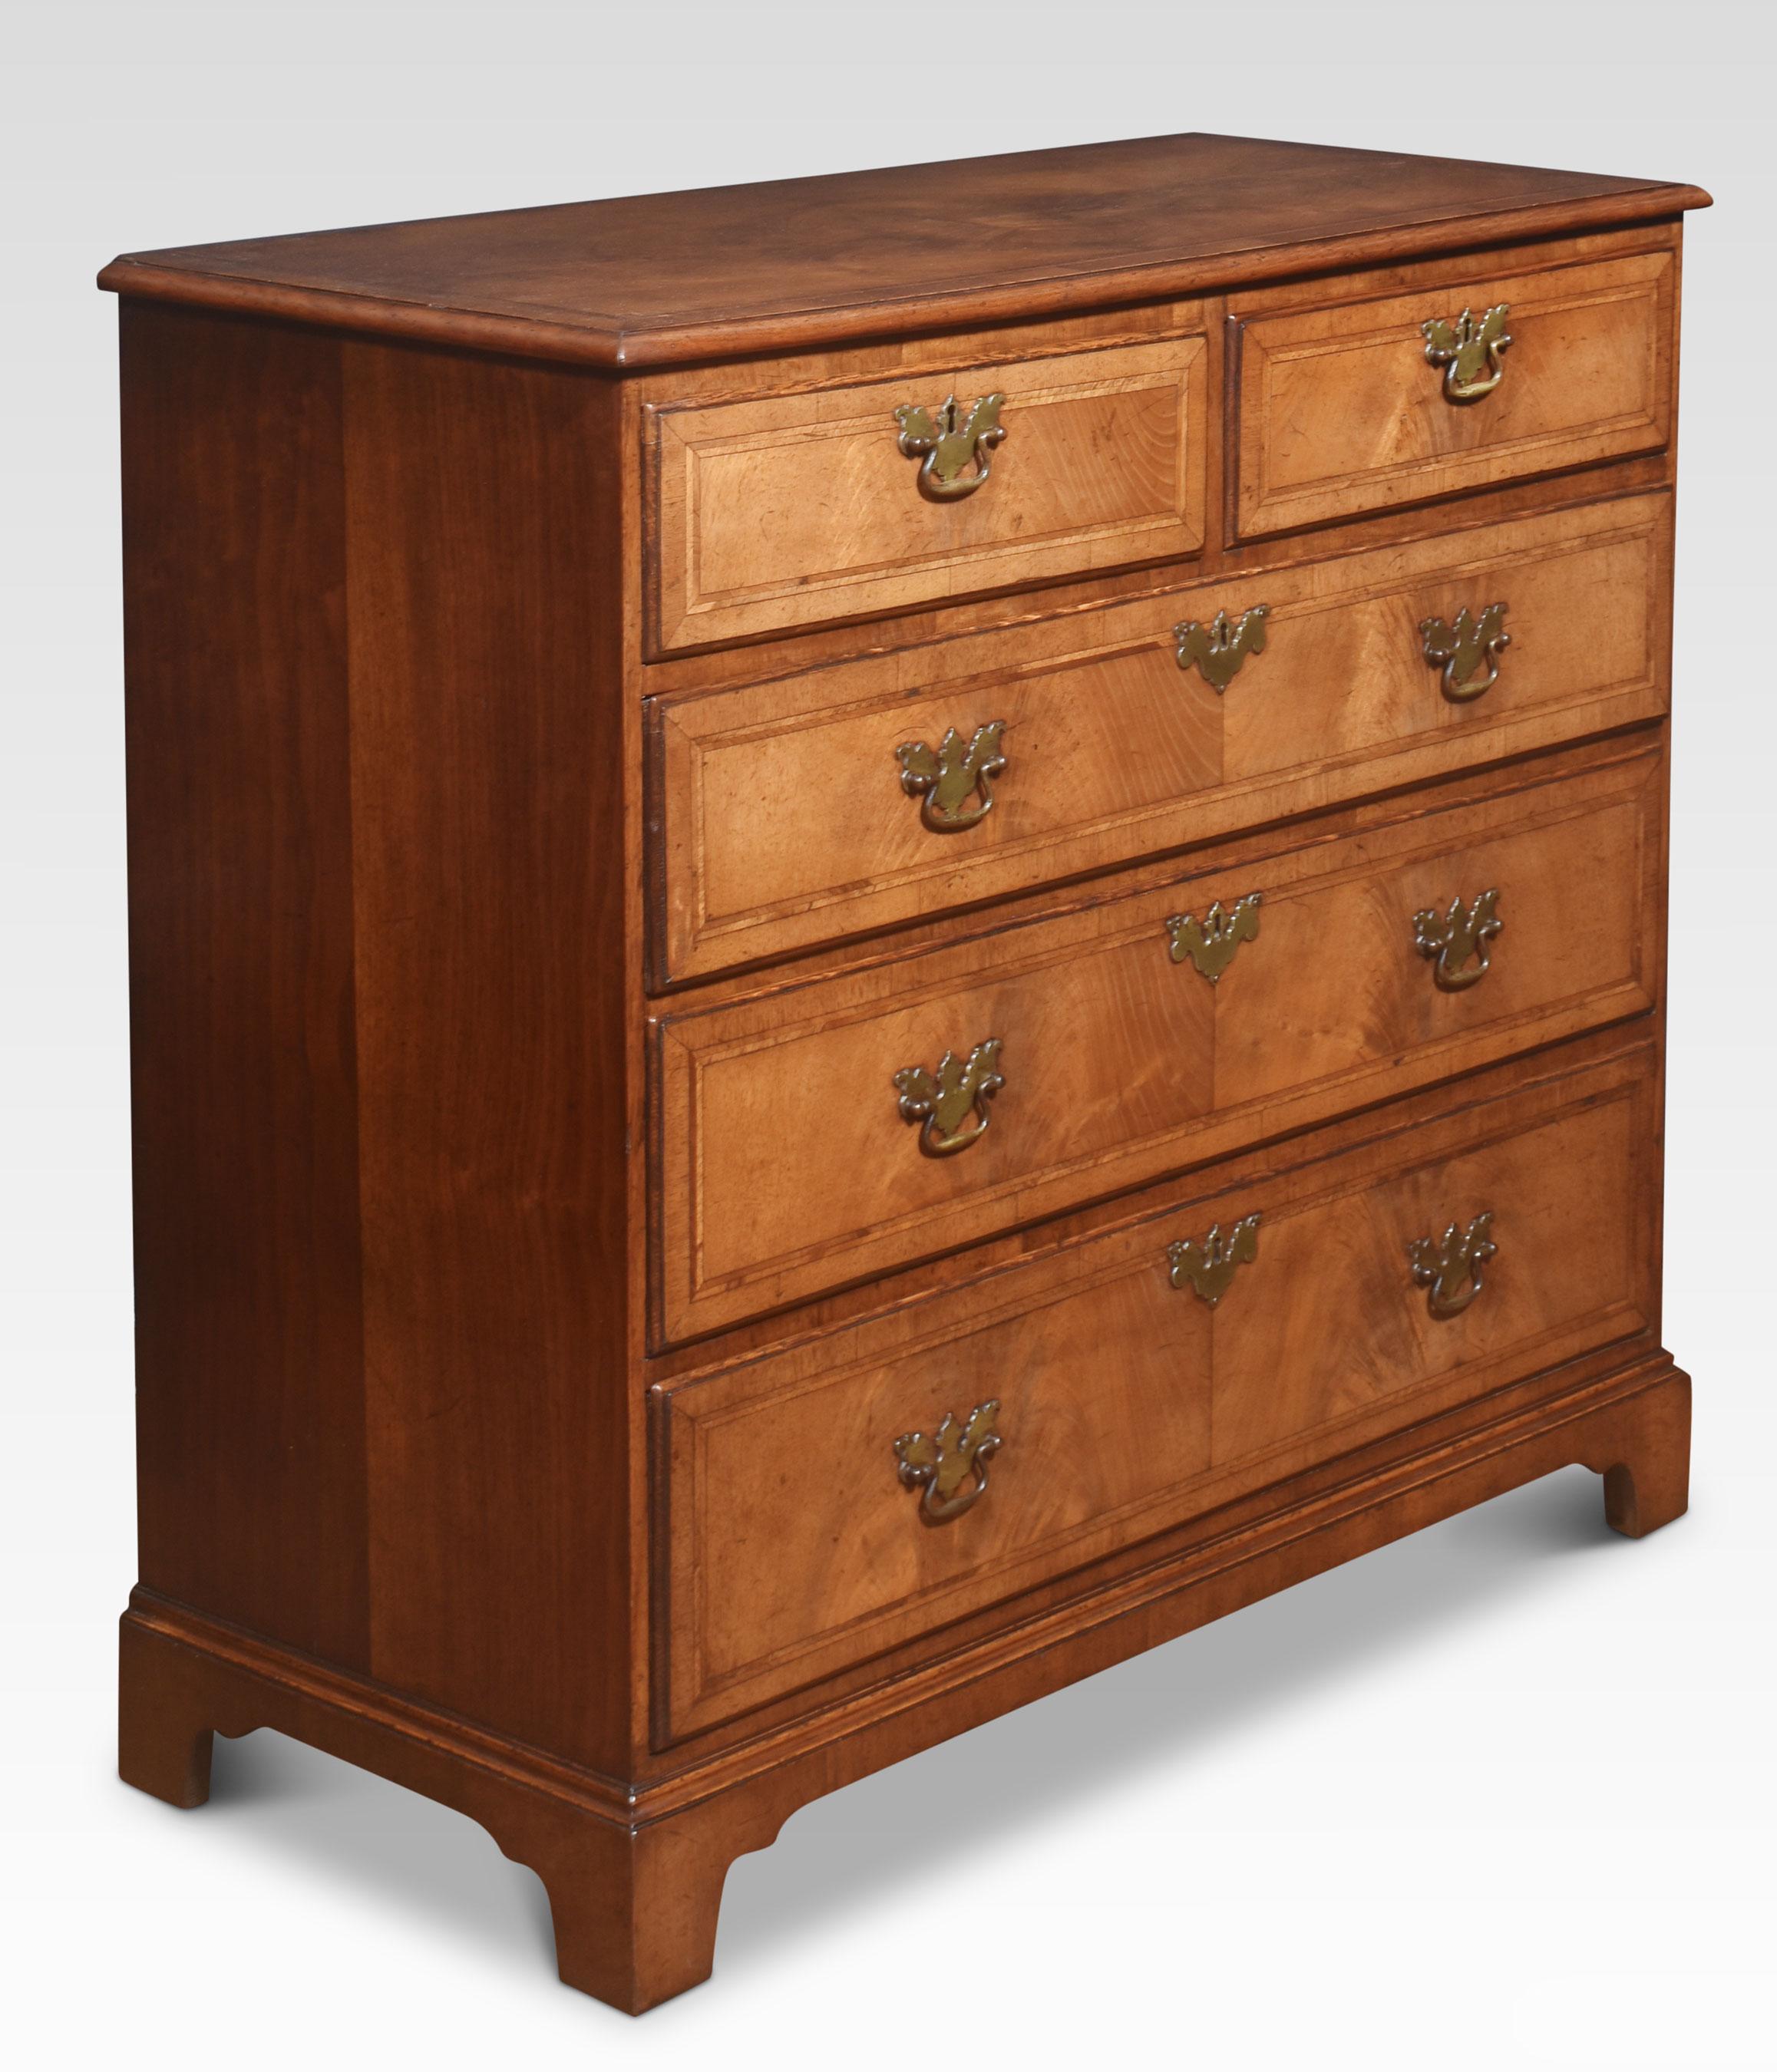 Georgian chest of drawers the rectangular well-figured top over two short and three long graduated drawers with original brass swan neck handles all raised on bracket feet.
Dimensions
Height 40 Inches
Width 41.5 Inches
Depth 19 Inches